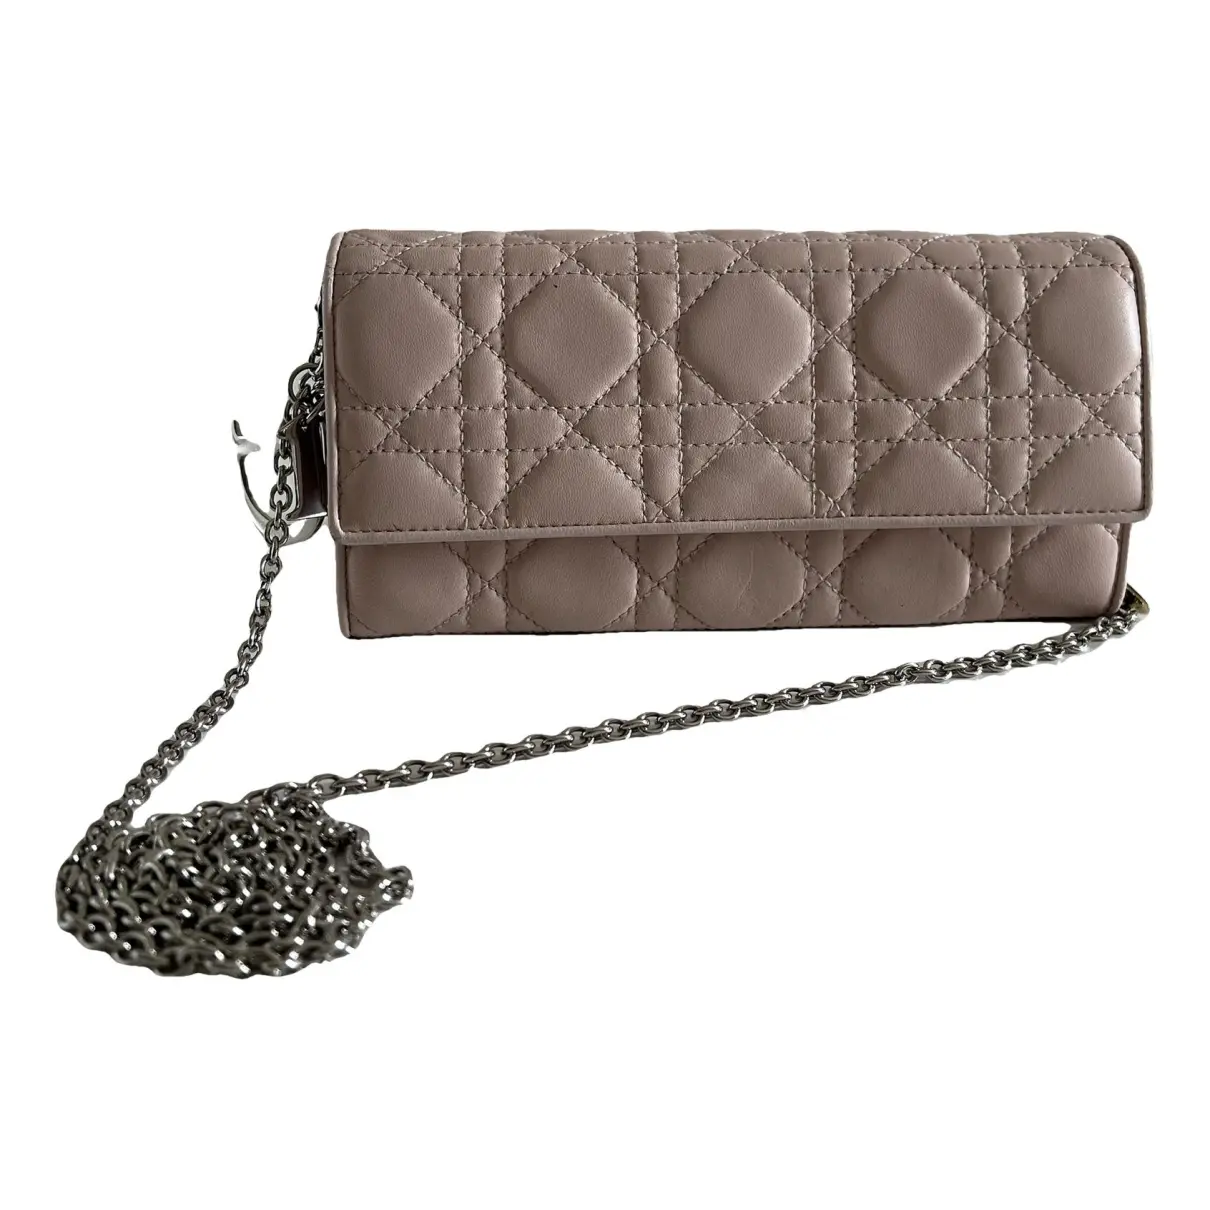 Lady Dior Wallet On Chain leather crossbody bag